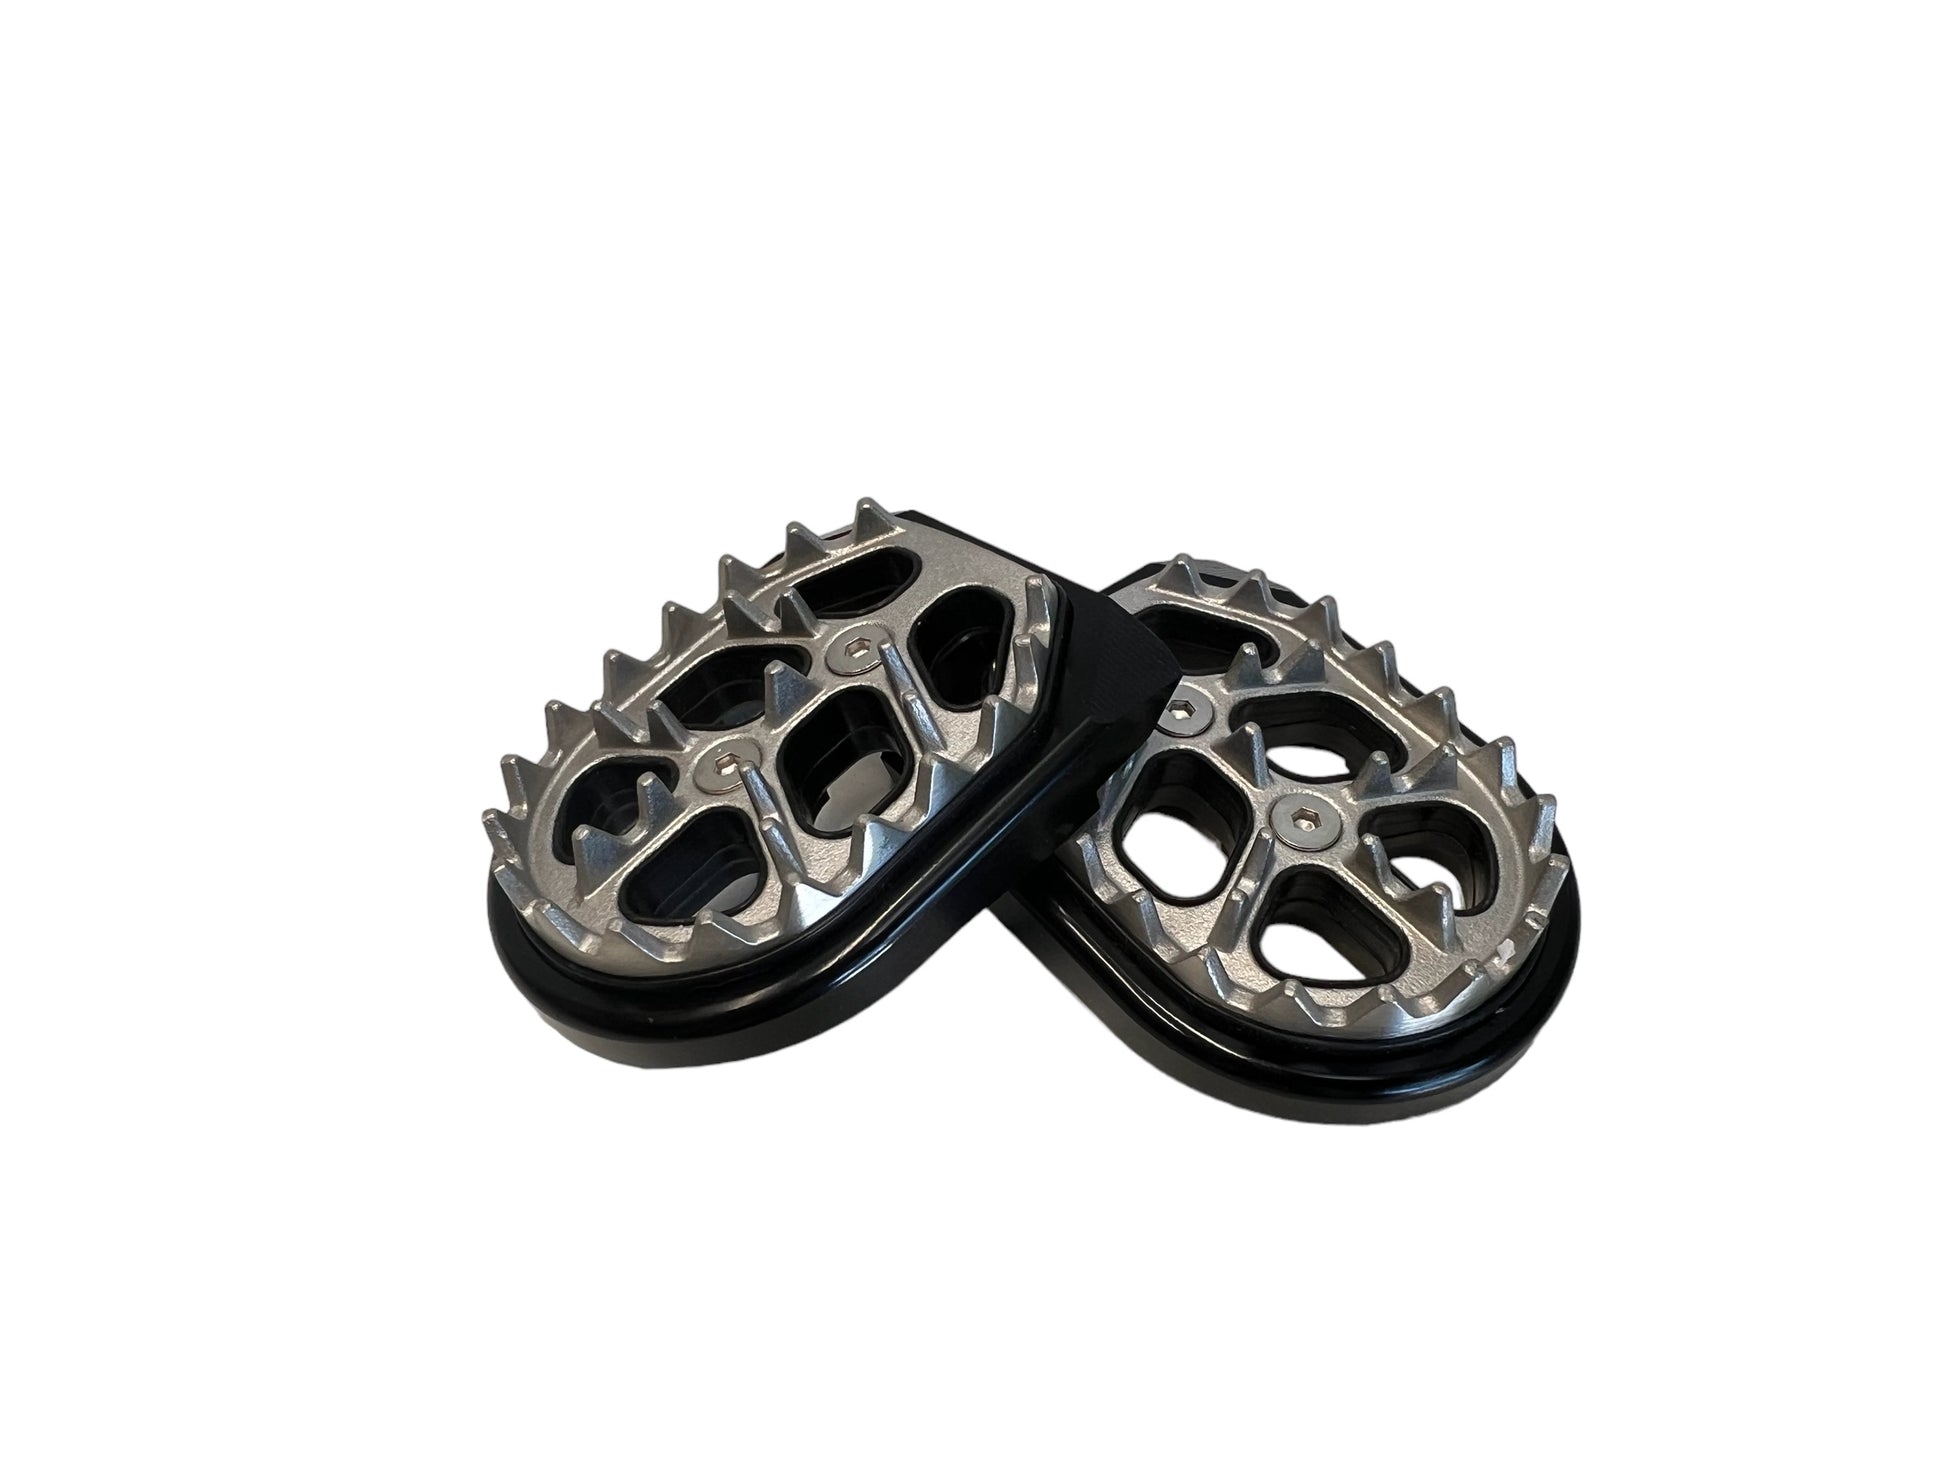 Stacyc CNC Anodized Foot Pegs - Black